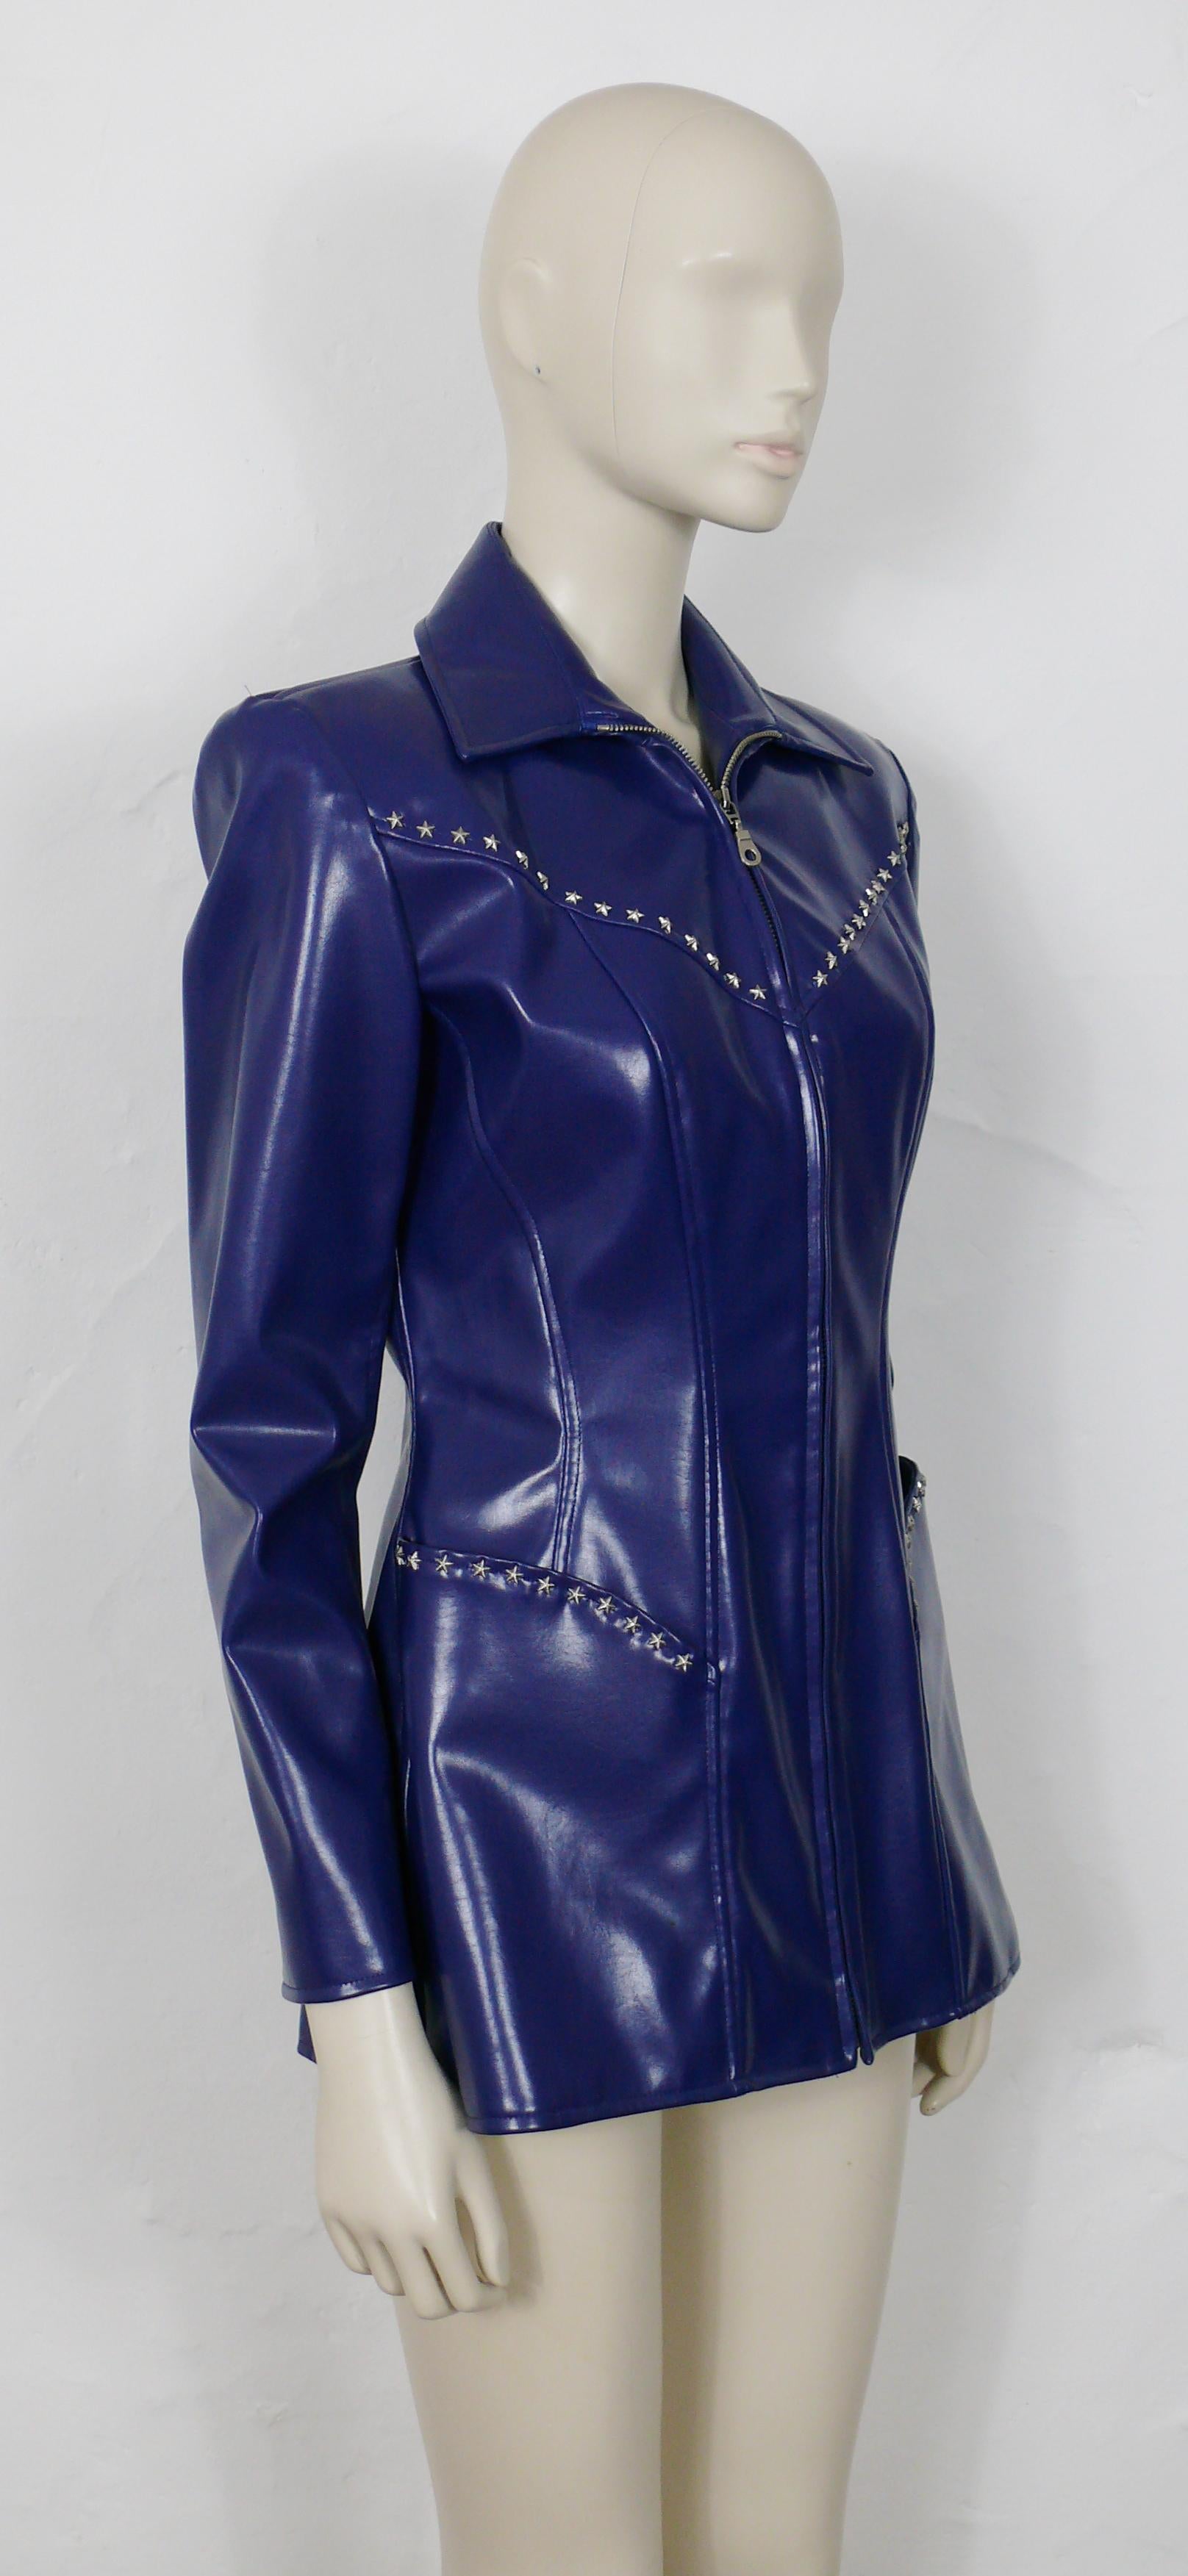 THIERRY MUGLER vintage blue rubber like jacket embellished with silver toned stars.

This jacket features :
- Soft blue rubber like fabric.
- Textured silver toned stars embellishement on bust and pockets.
- Classic collar.
- Long sleeves.
-